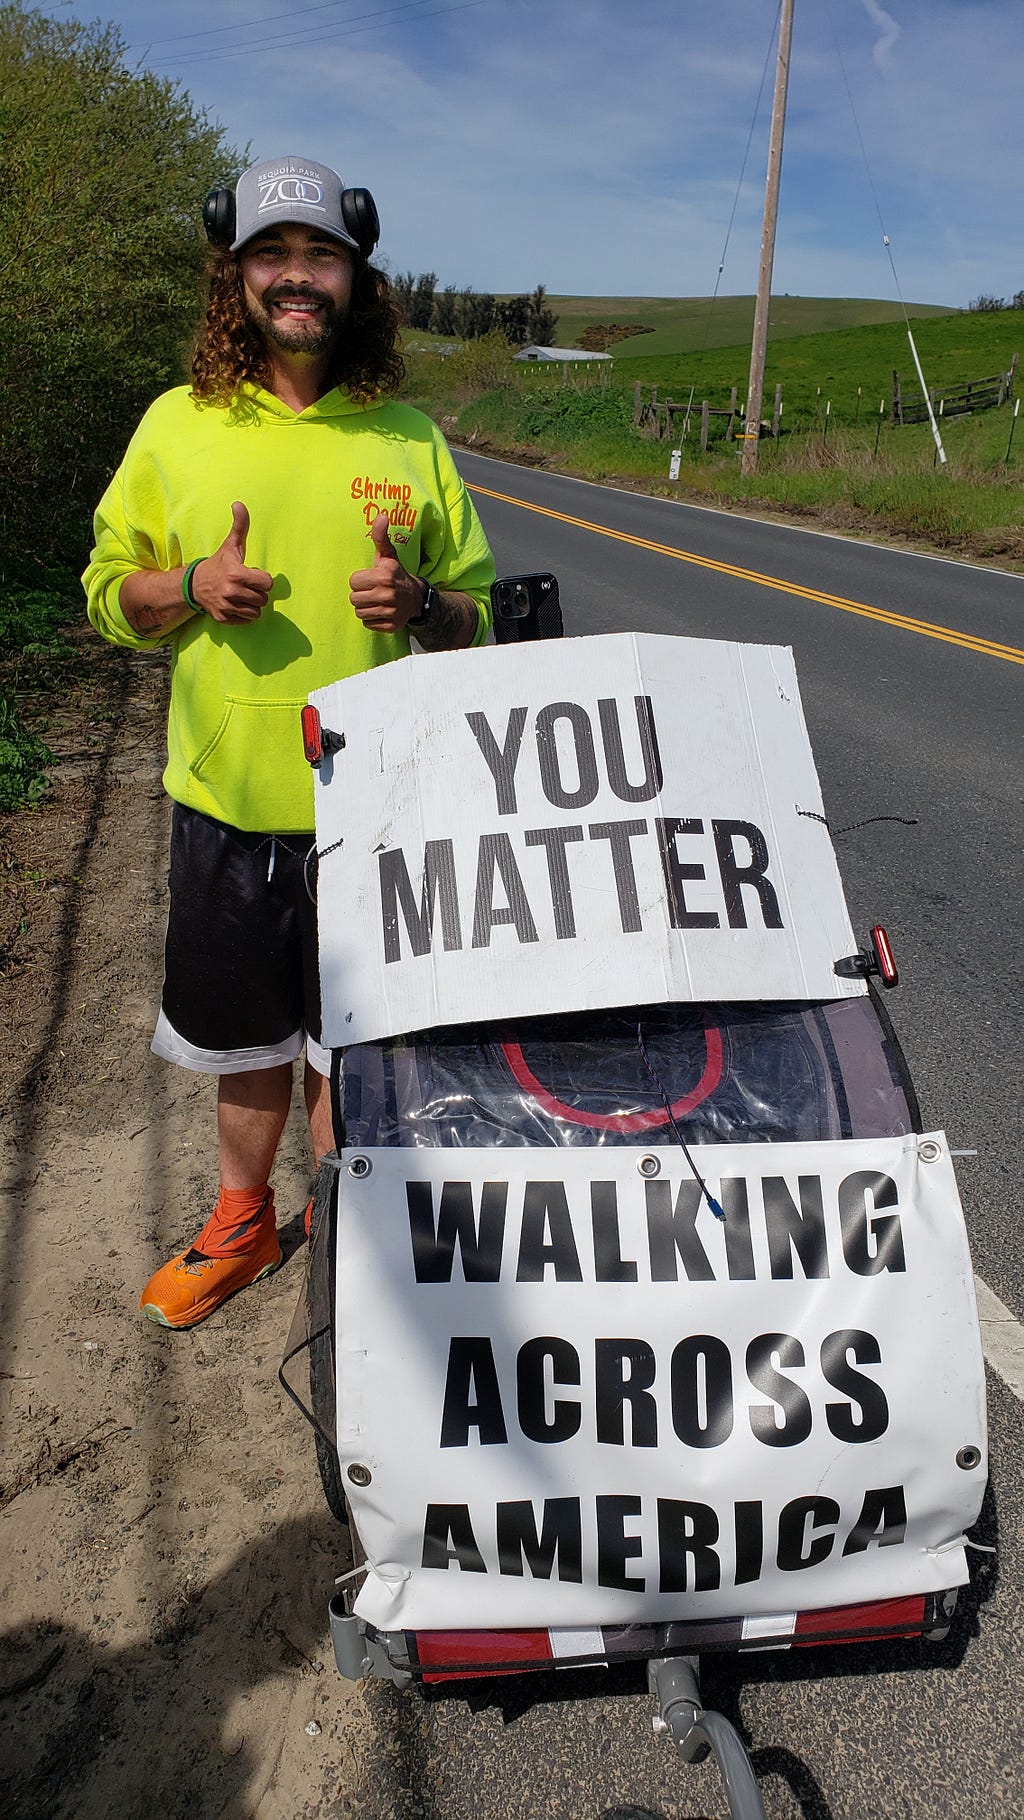 A young white man with curly, shoulder-length hair wearing a fluorescent green shirt, pushing a cart with his belongings and 2 signs — one says “You matter” and the other says “Walking across America.” He is standing on the dirt shoulder of a 2-lane country road.